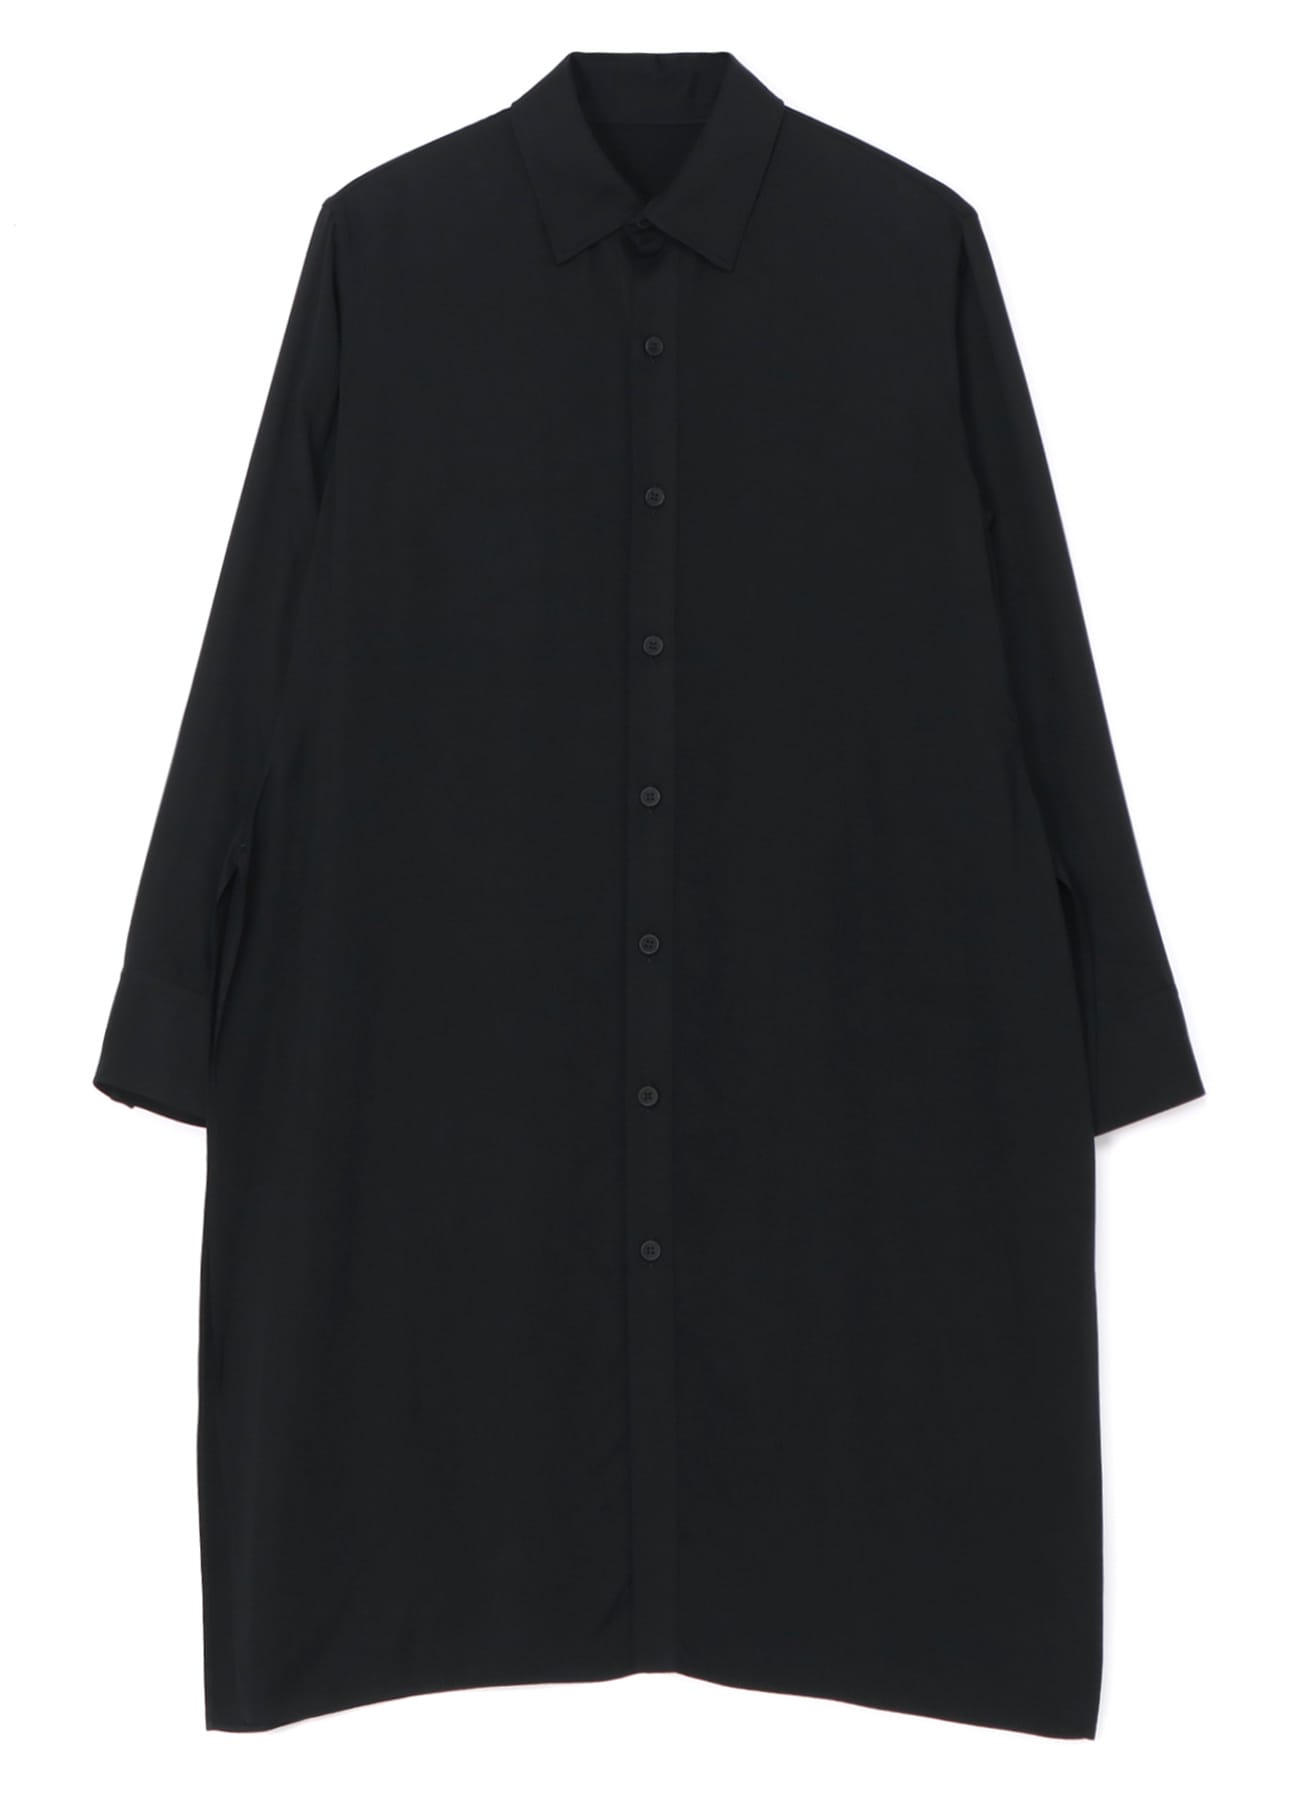 RAYON SATIN LONG SHIRT WITH SIDE SLITS(XS Black): Vintage 1.1｜THE 